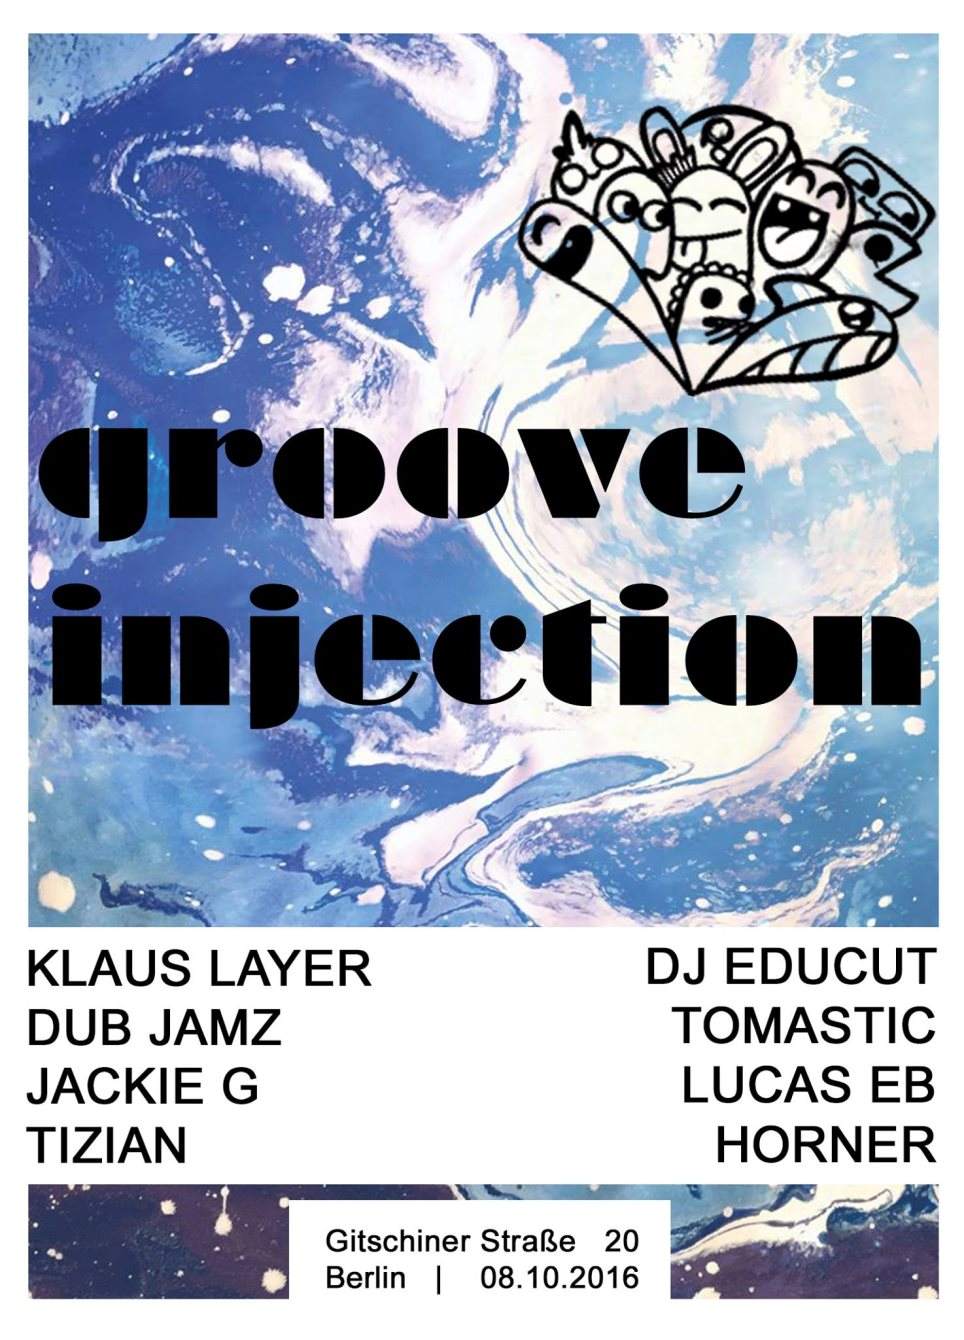 Zosse presents: Groove Injection 02 - Página frontal